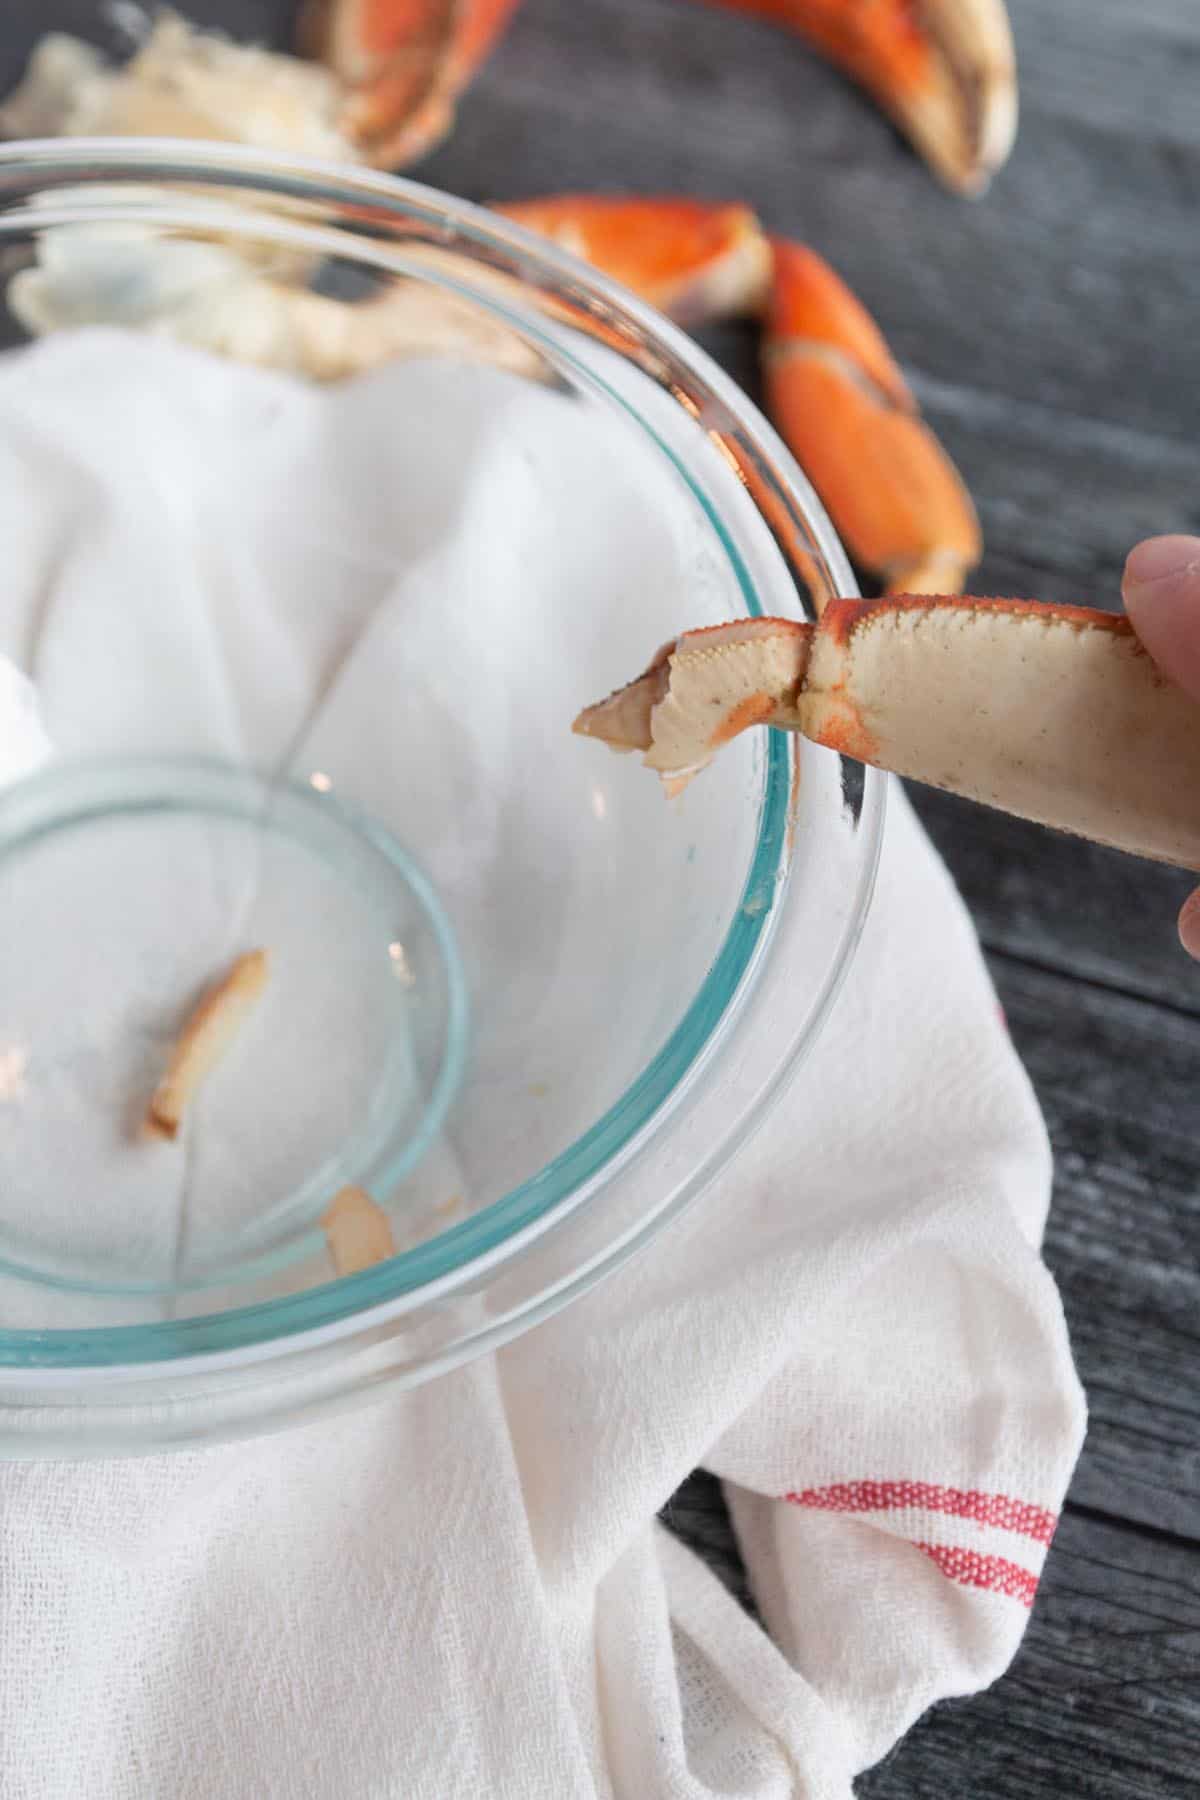 A crab leg being hit on the side of a bowl to shake out the meat.